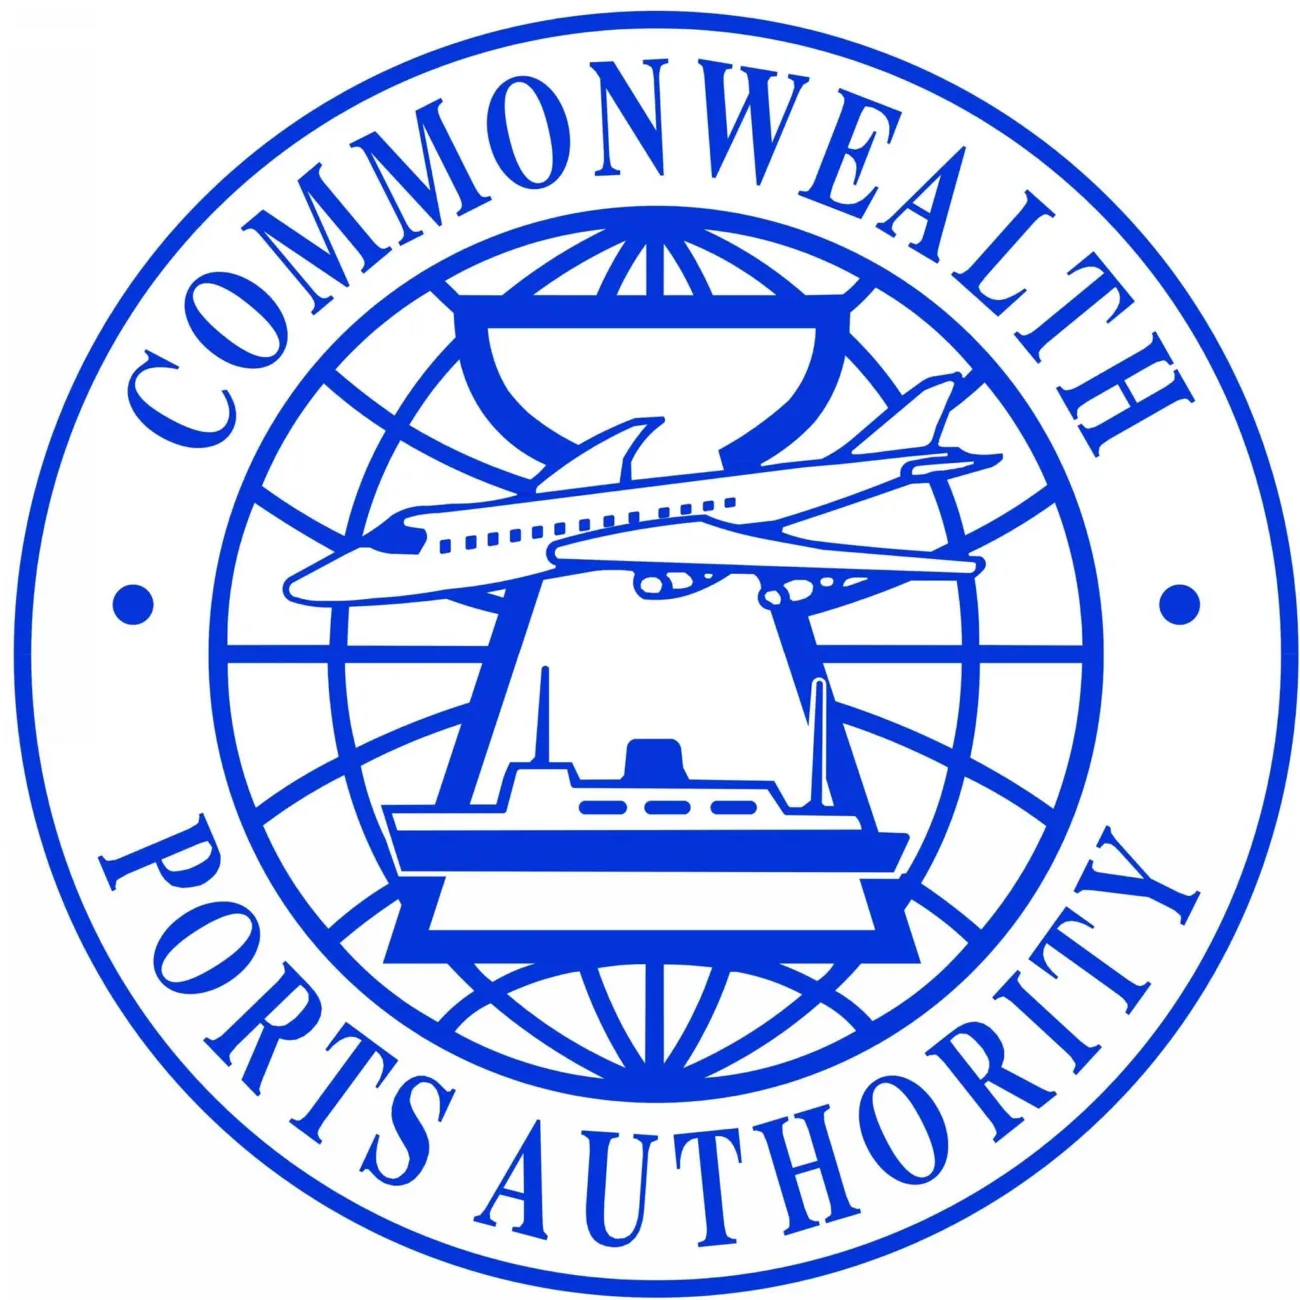 CPA - Commonwealth Ports Autority